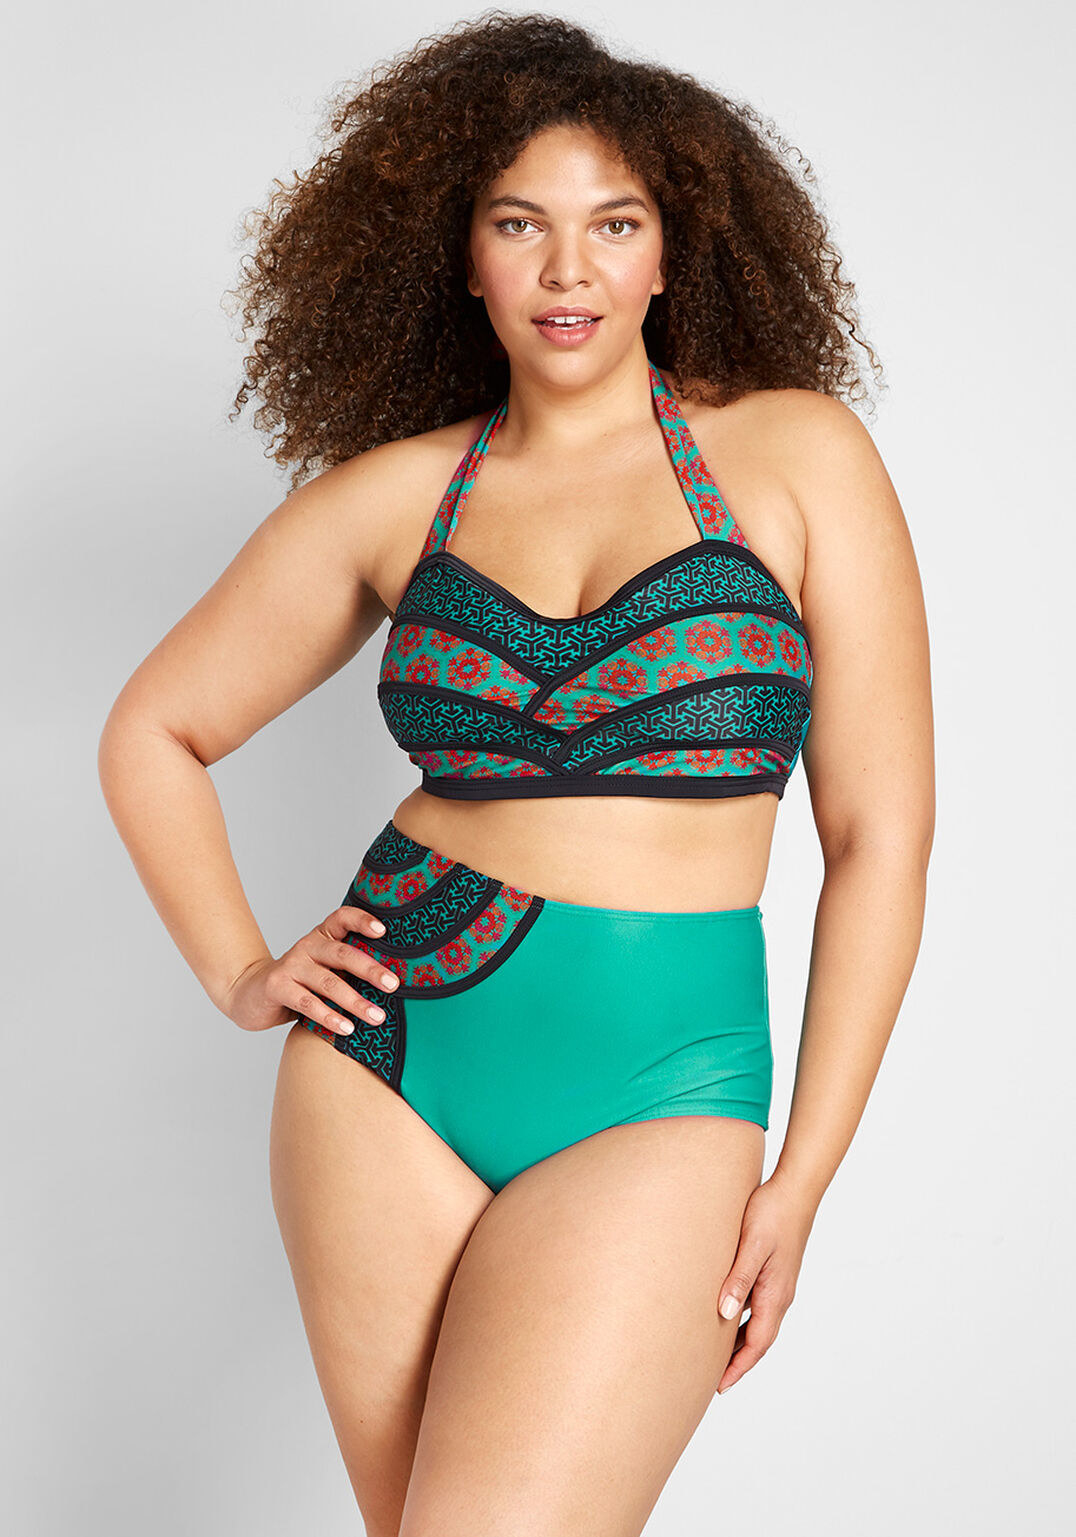 a model wearing the bathing suit top with four pattern areas showcasing two different green designs with red and black accents